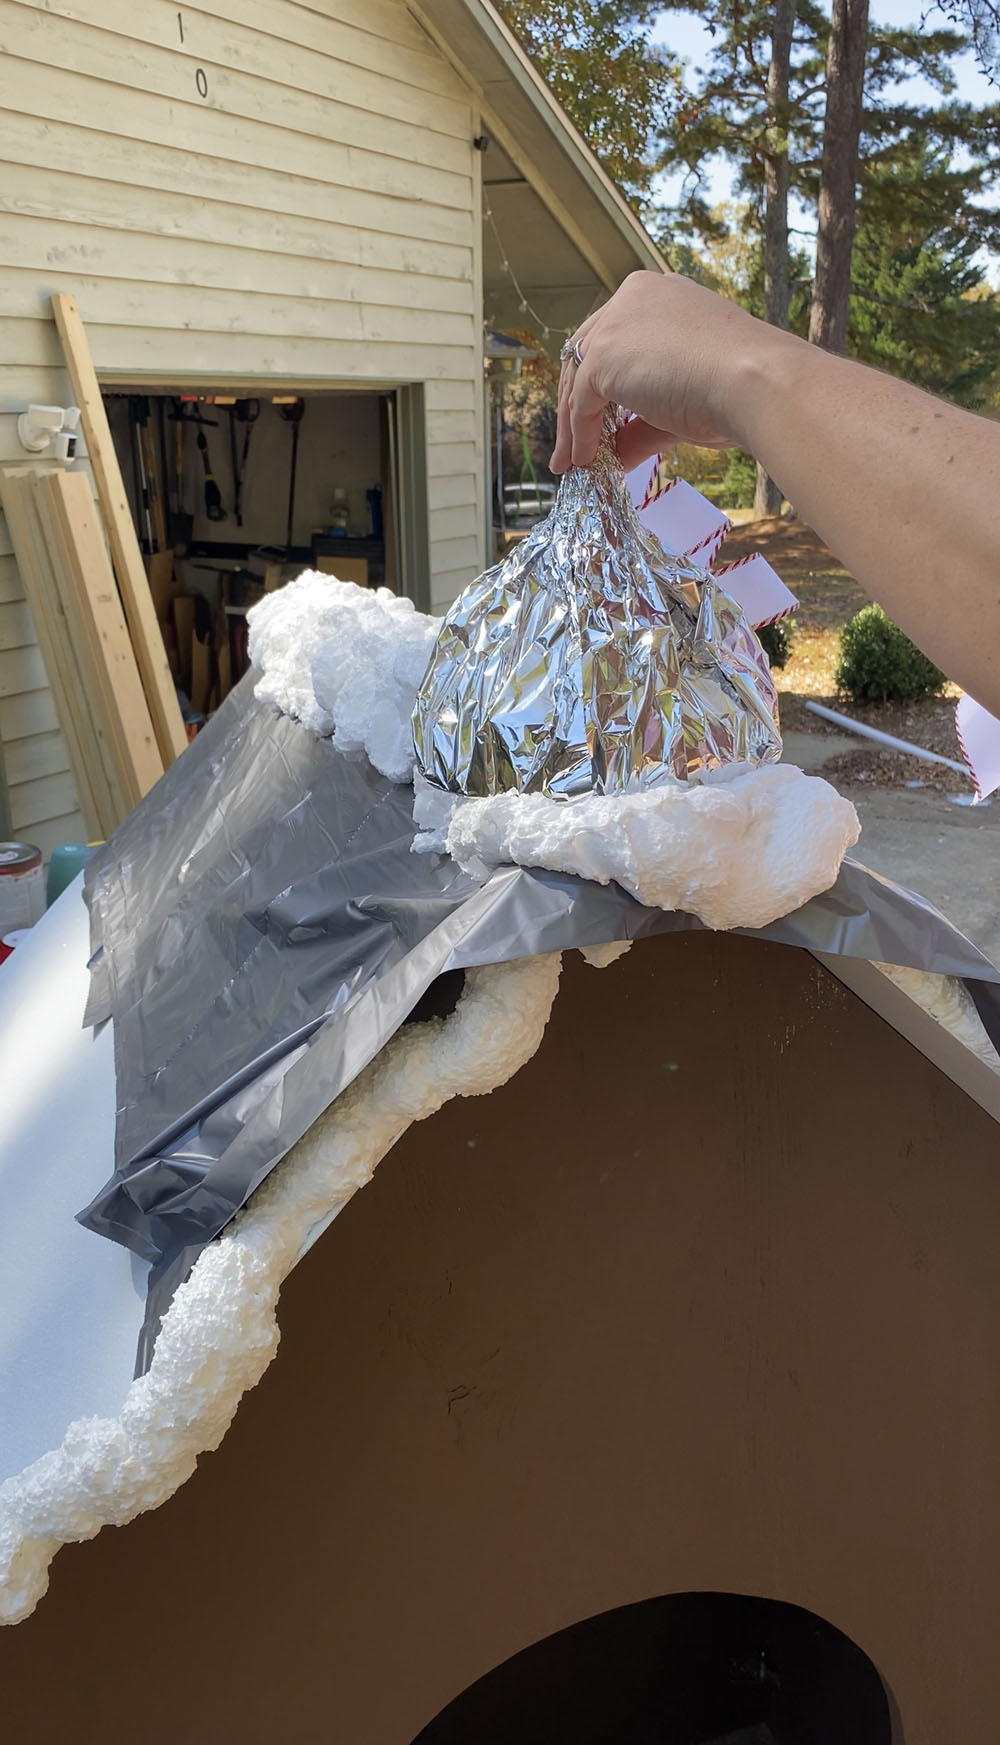 The roof of the gingerbread house being assembled with spray foam and a plastic sheet.